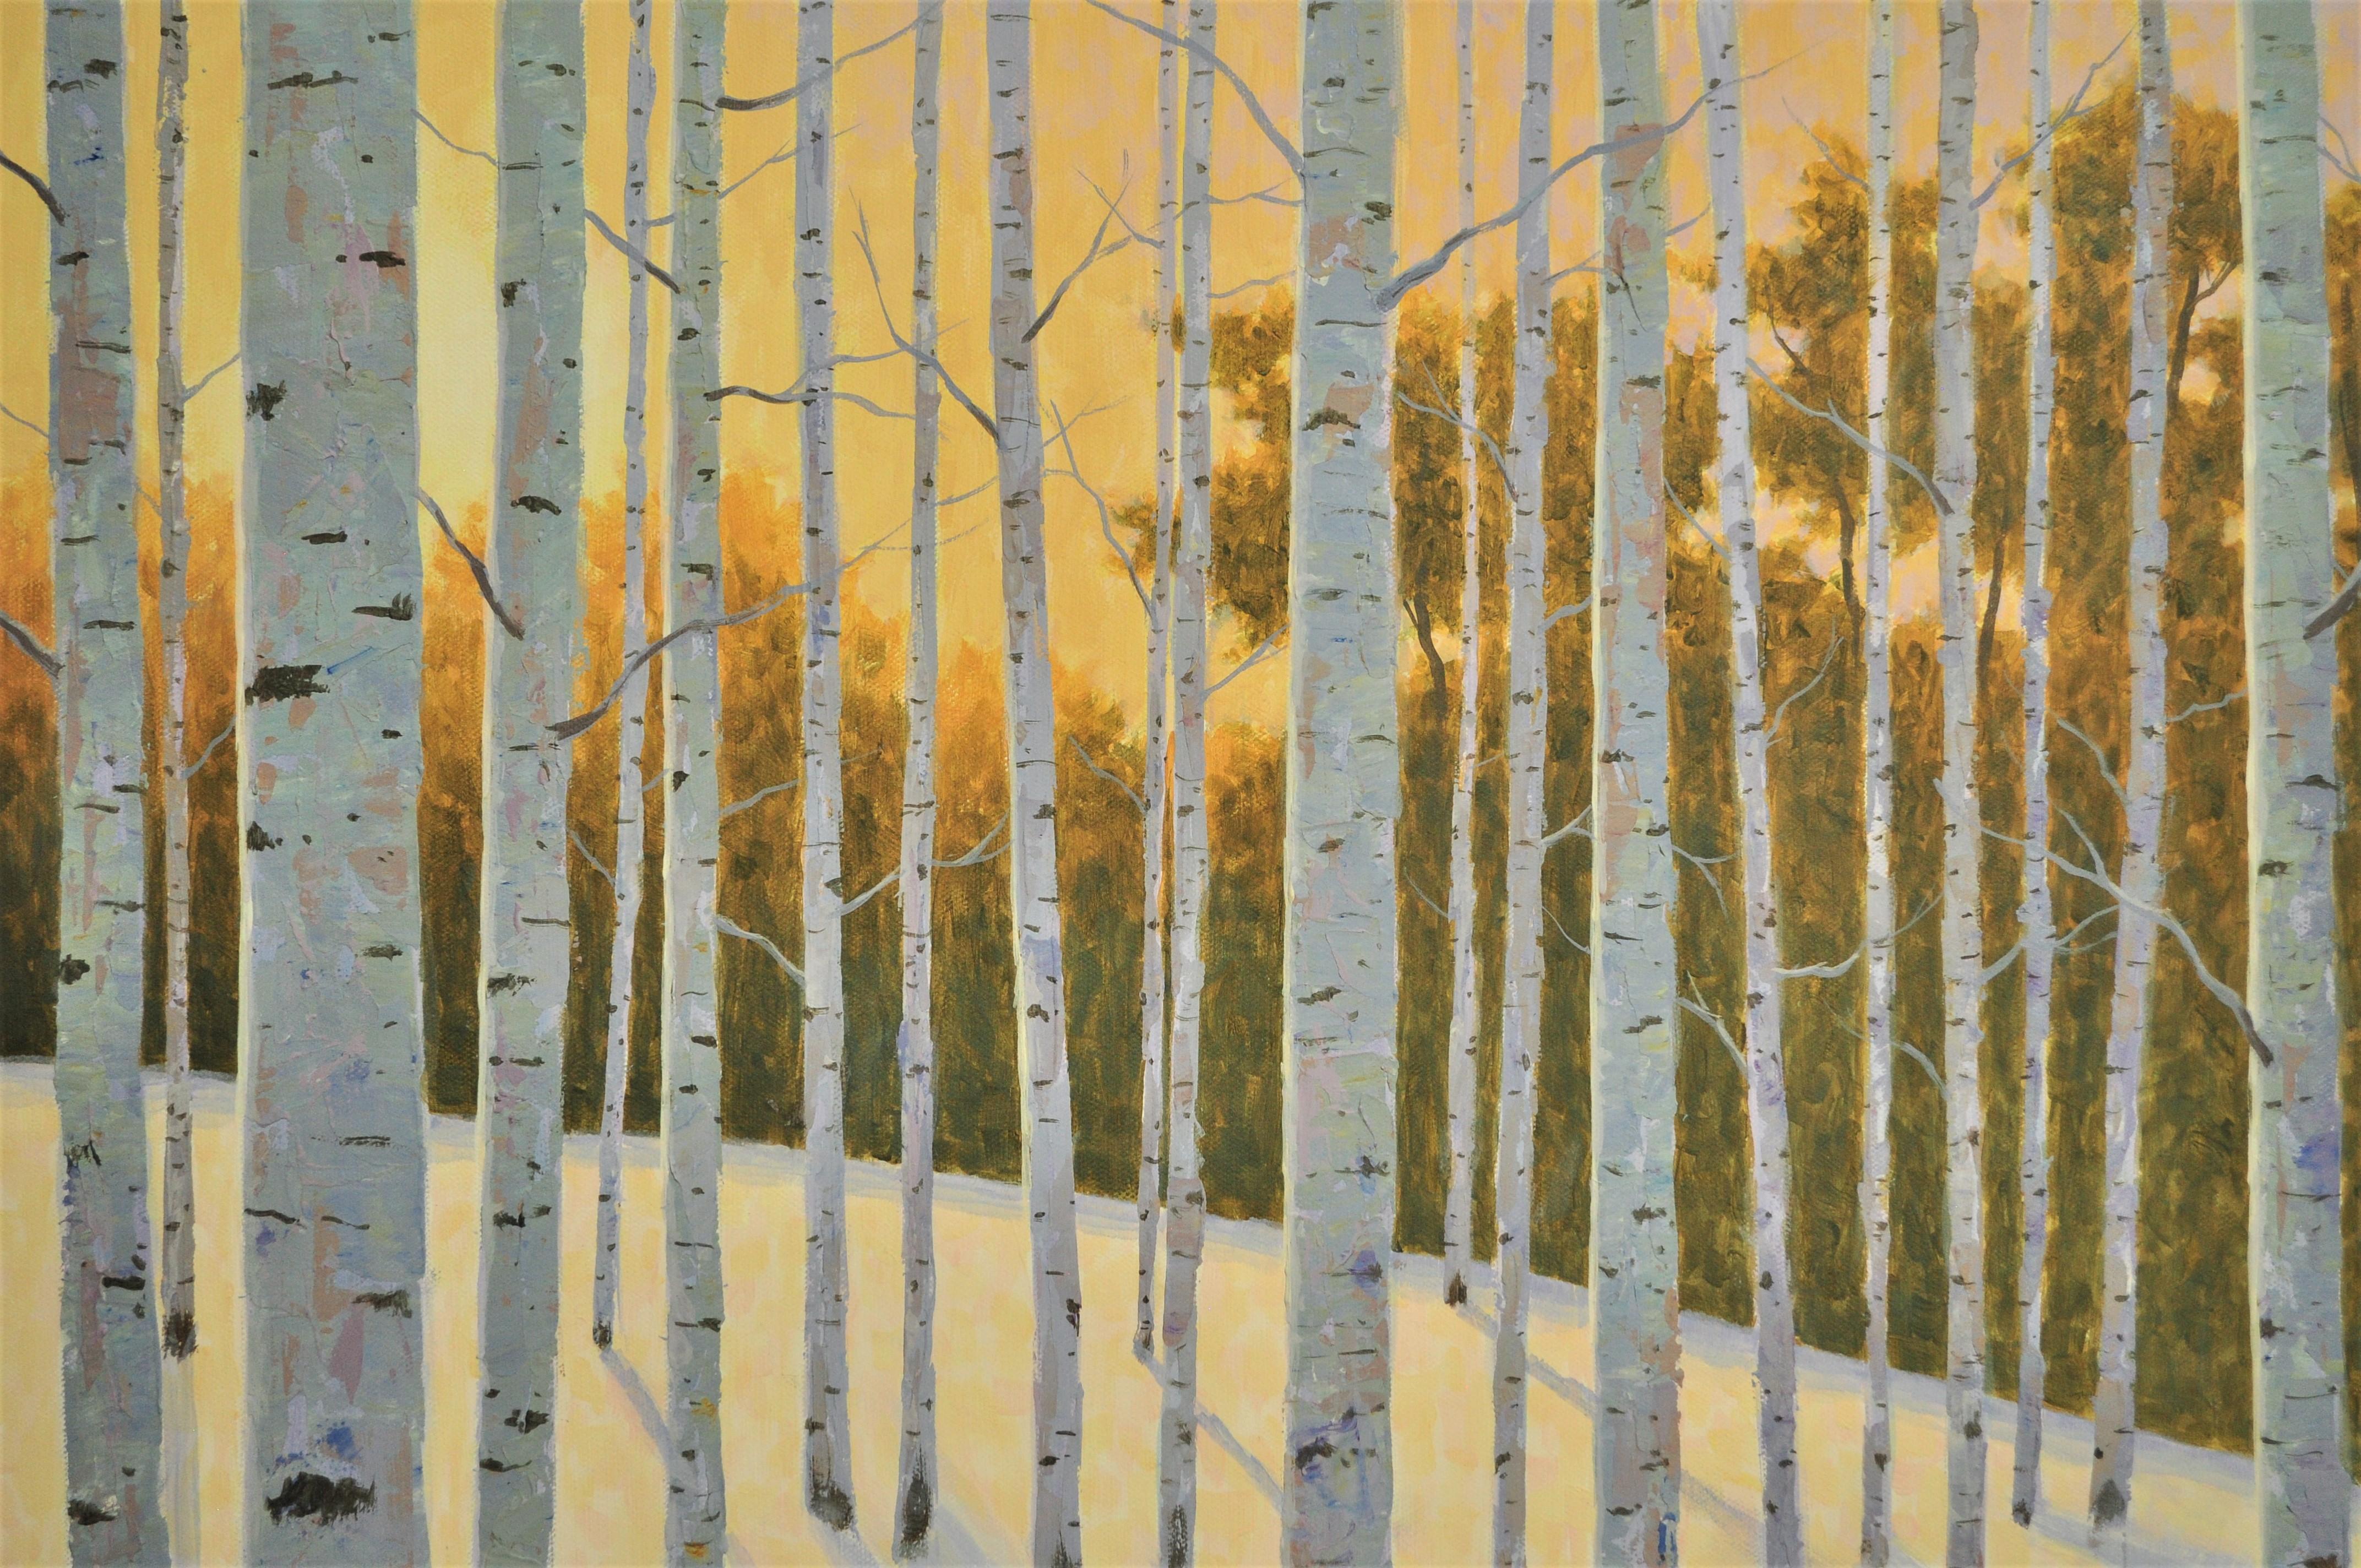 <p>Artist Comments<br>A late afternoon winter scene, with the setting sun casting long shadows through the tall aspens. The snowy hill and sky glow with the last soft light of the day. Robert used a palette knife to create the colorful paintwork in